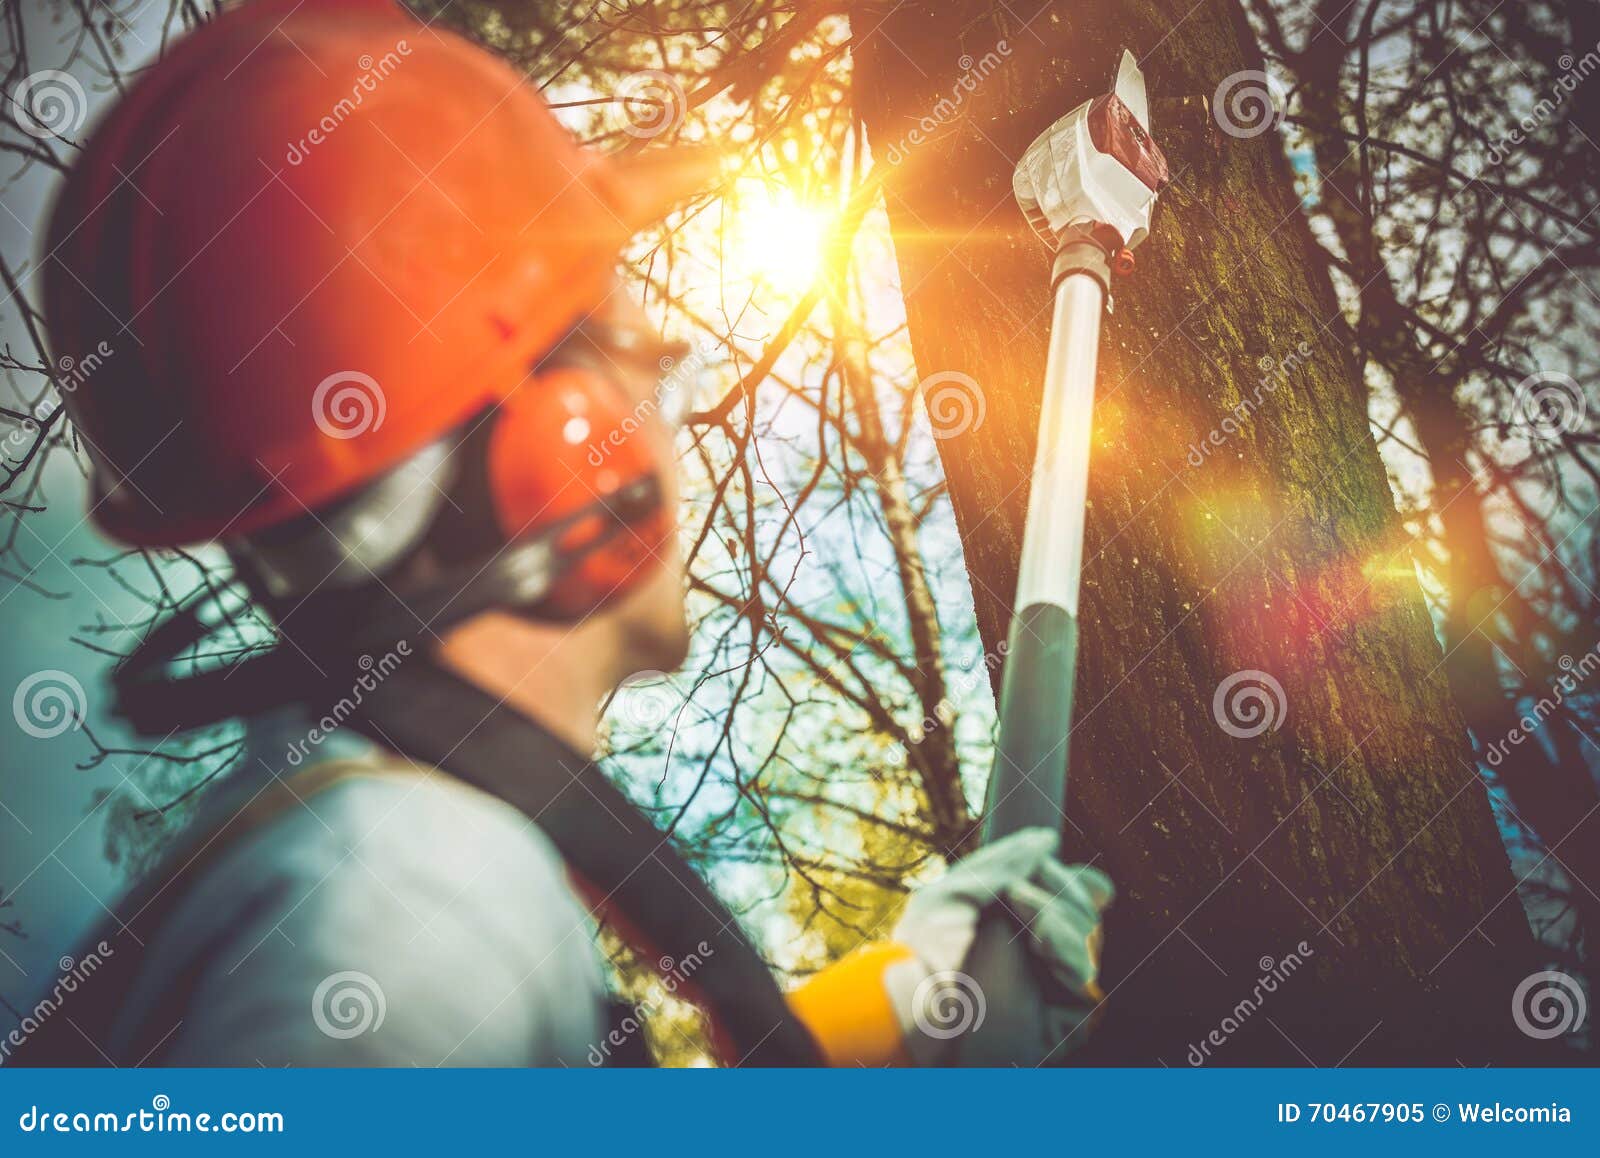 tree branches pro cutting